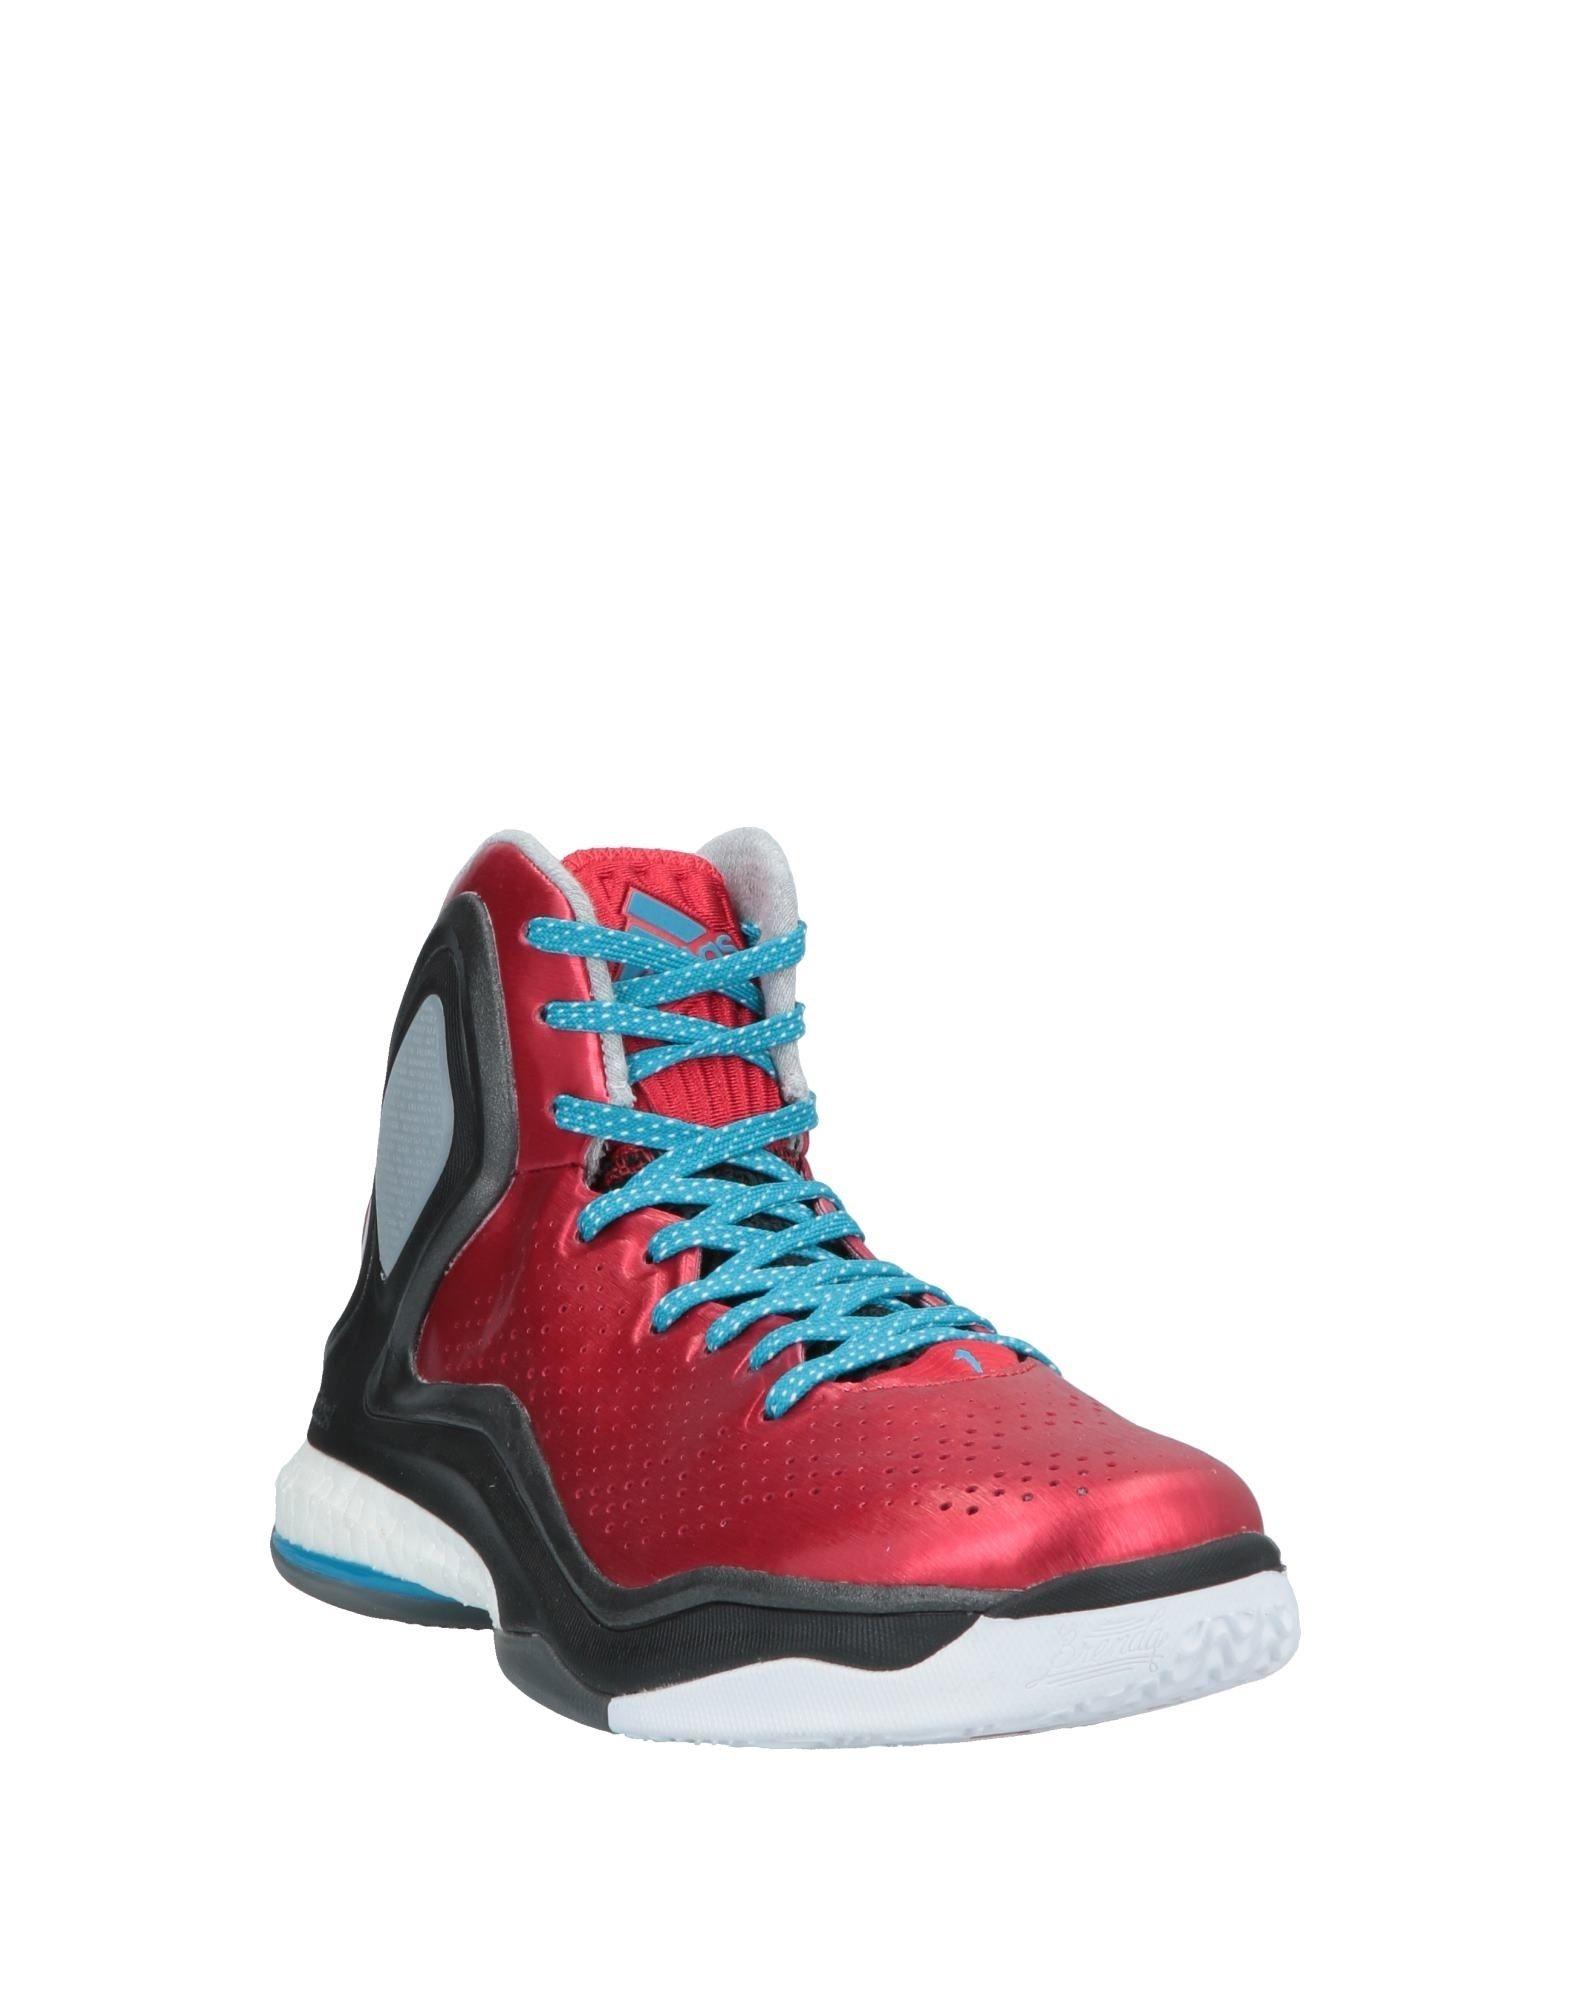 adidas High-tops & Sneakers in Red for Men - Lyst